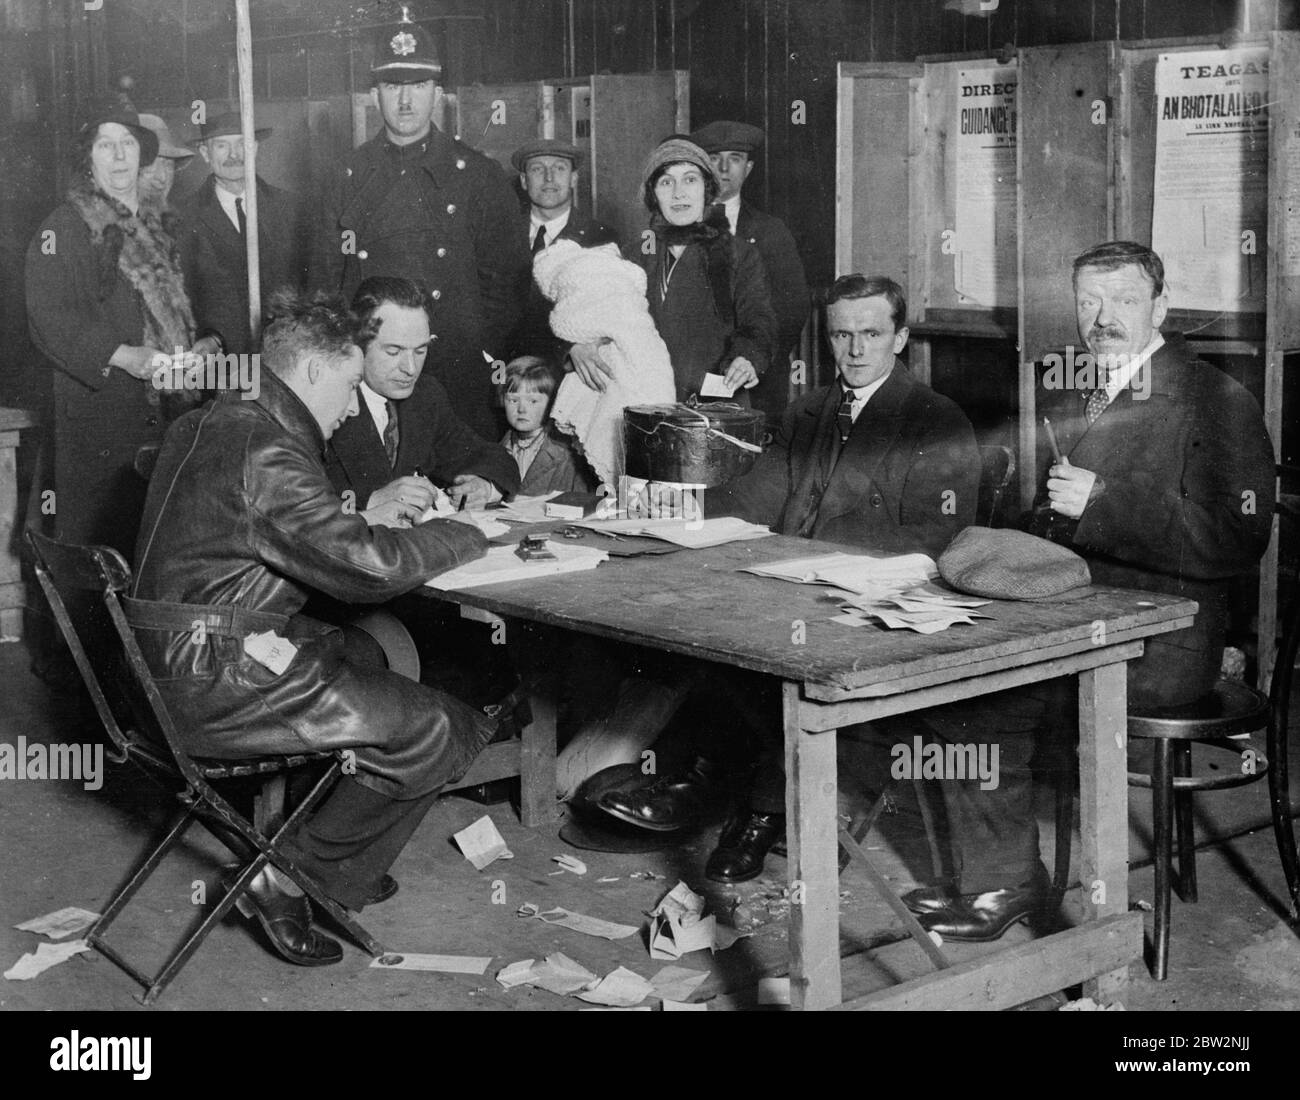 Polling in the Irish elections . Polling took place in the Irish elections . Troops were sent to a number of areas to prevent intimidation in the voting . The interior of a polling booth during the elections . 17 February 1932 30s, 30's, 1930s, 1930's, thirties, nineteen thirties Stock Photo